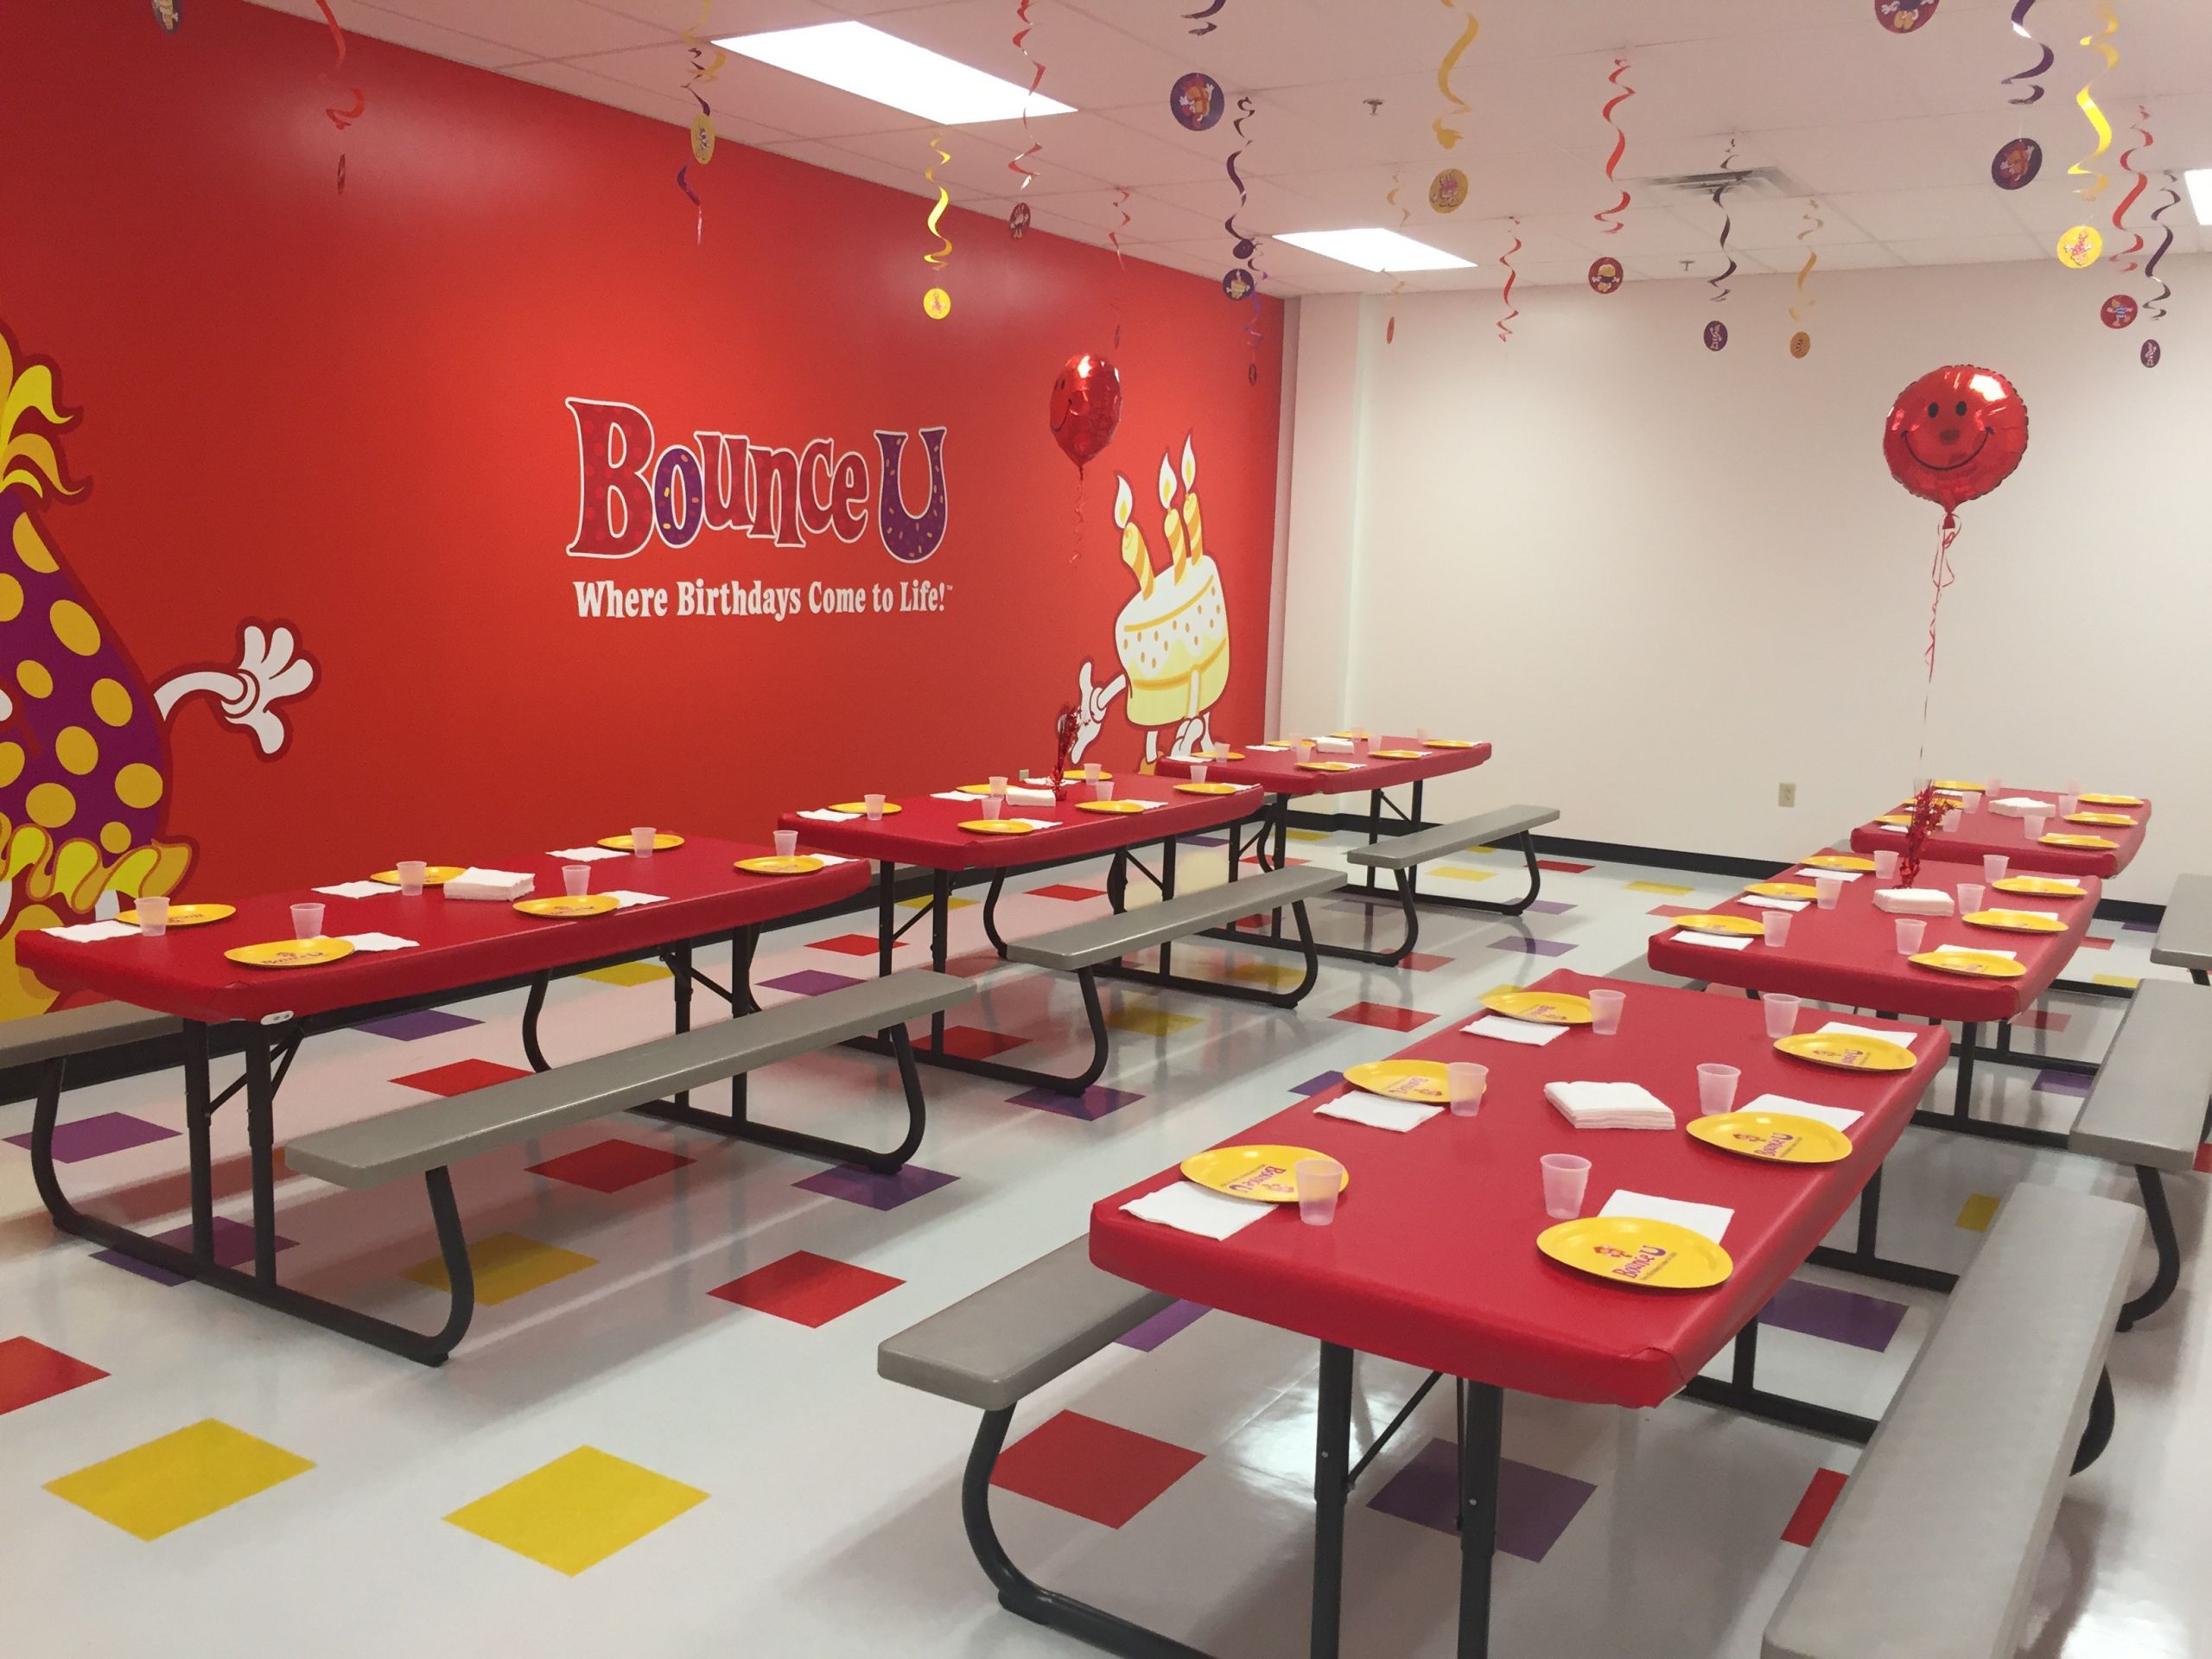 The Best Ideas for Bounceu Birthday Party - Home, Family, Style and Art ...